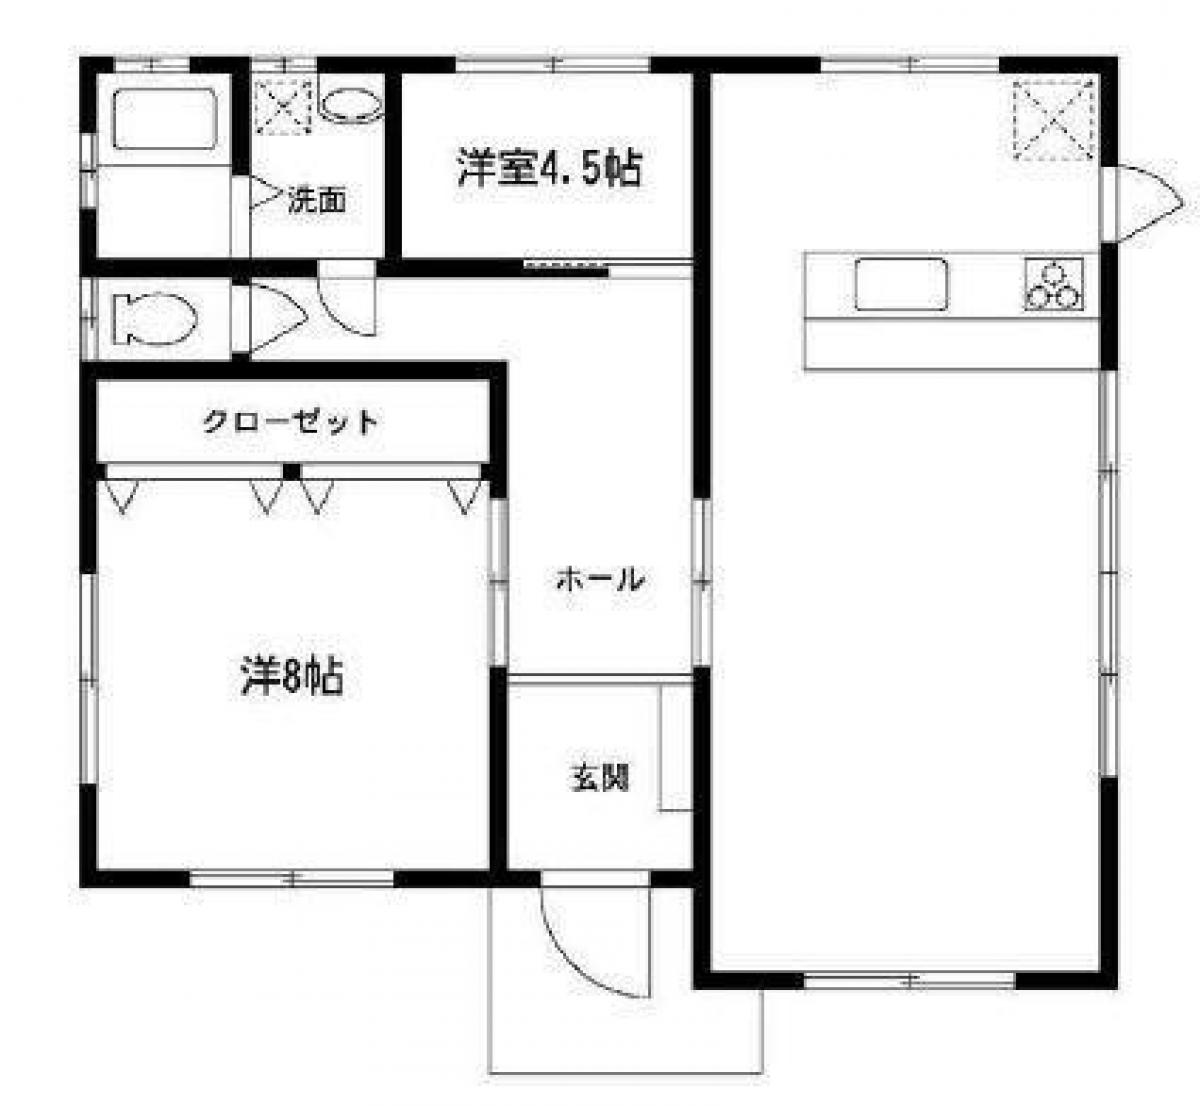 Picture of Home For Sale in Hioki Shi, Kagoshima, Japan